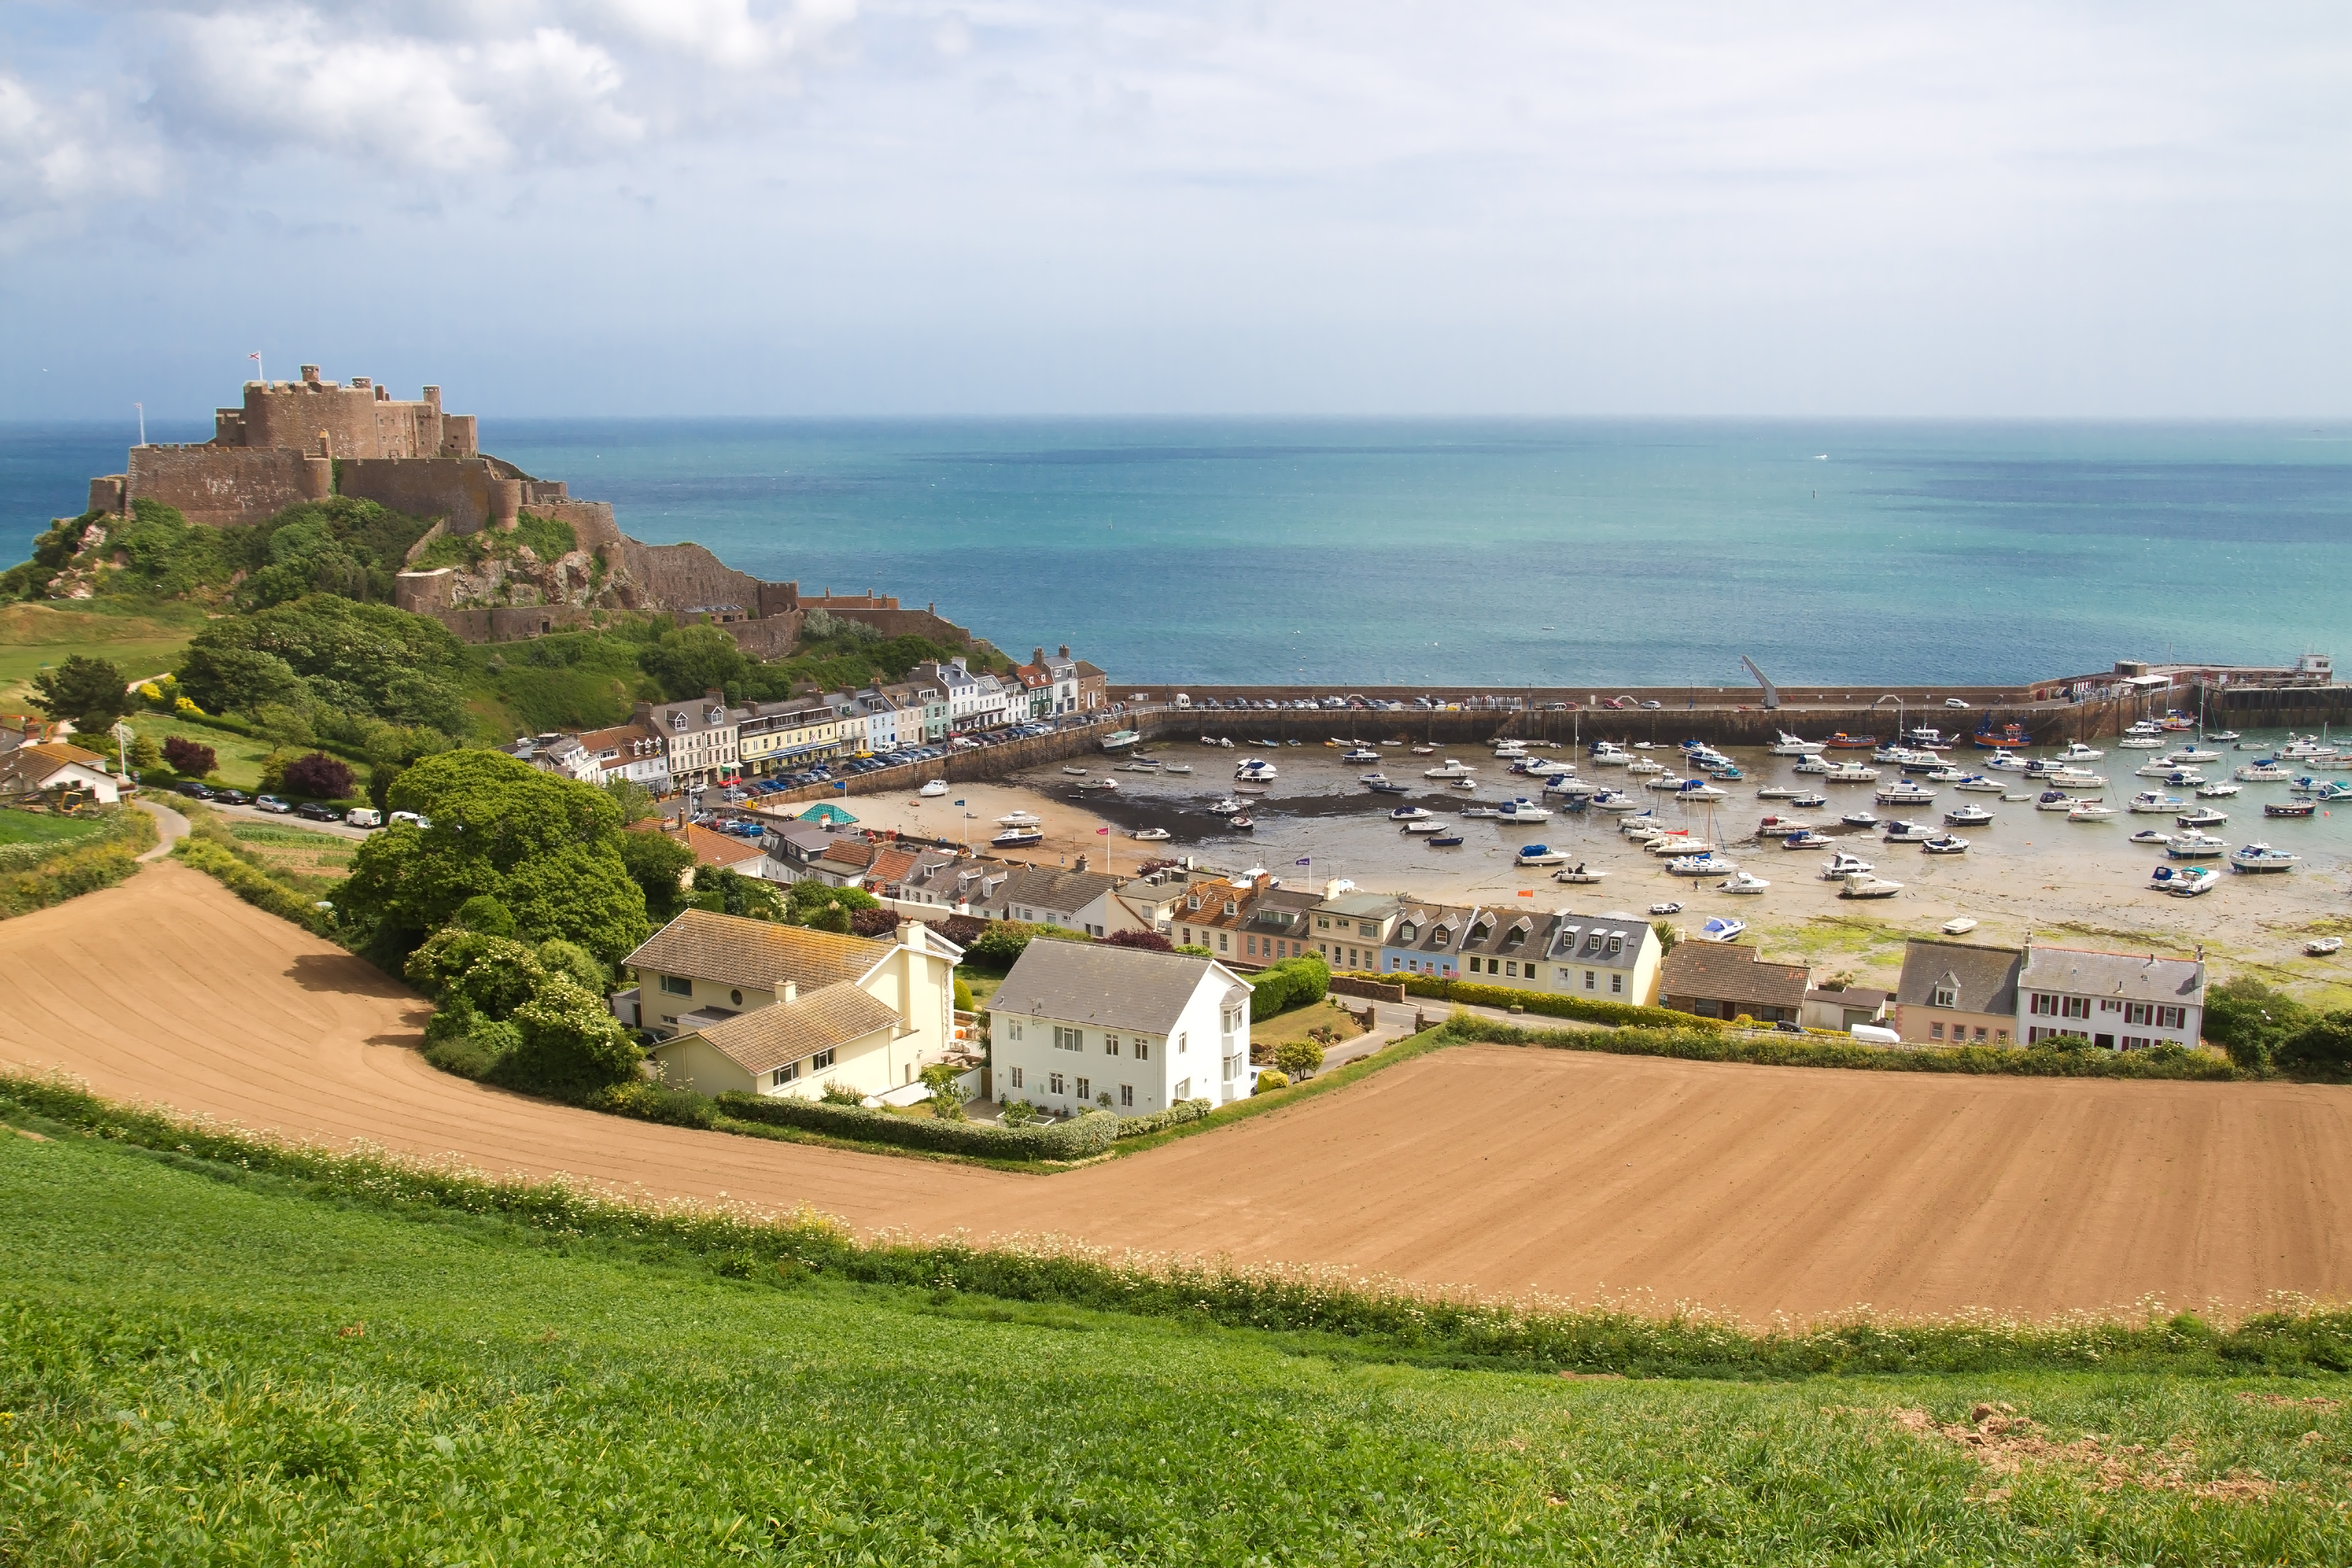 cheap flights to jersey from london